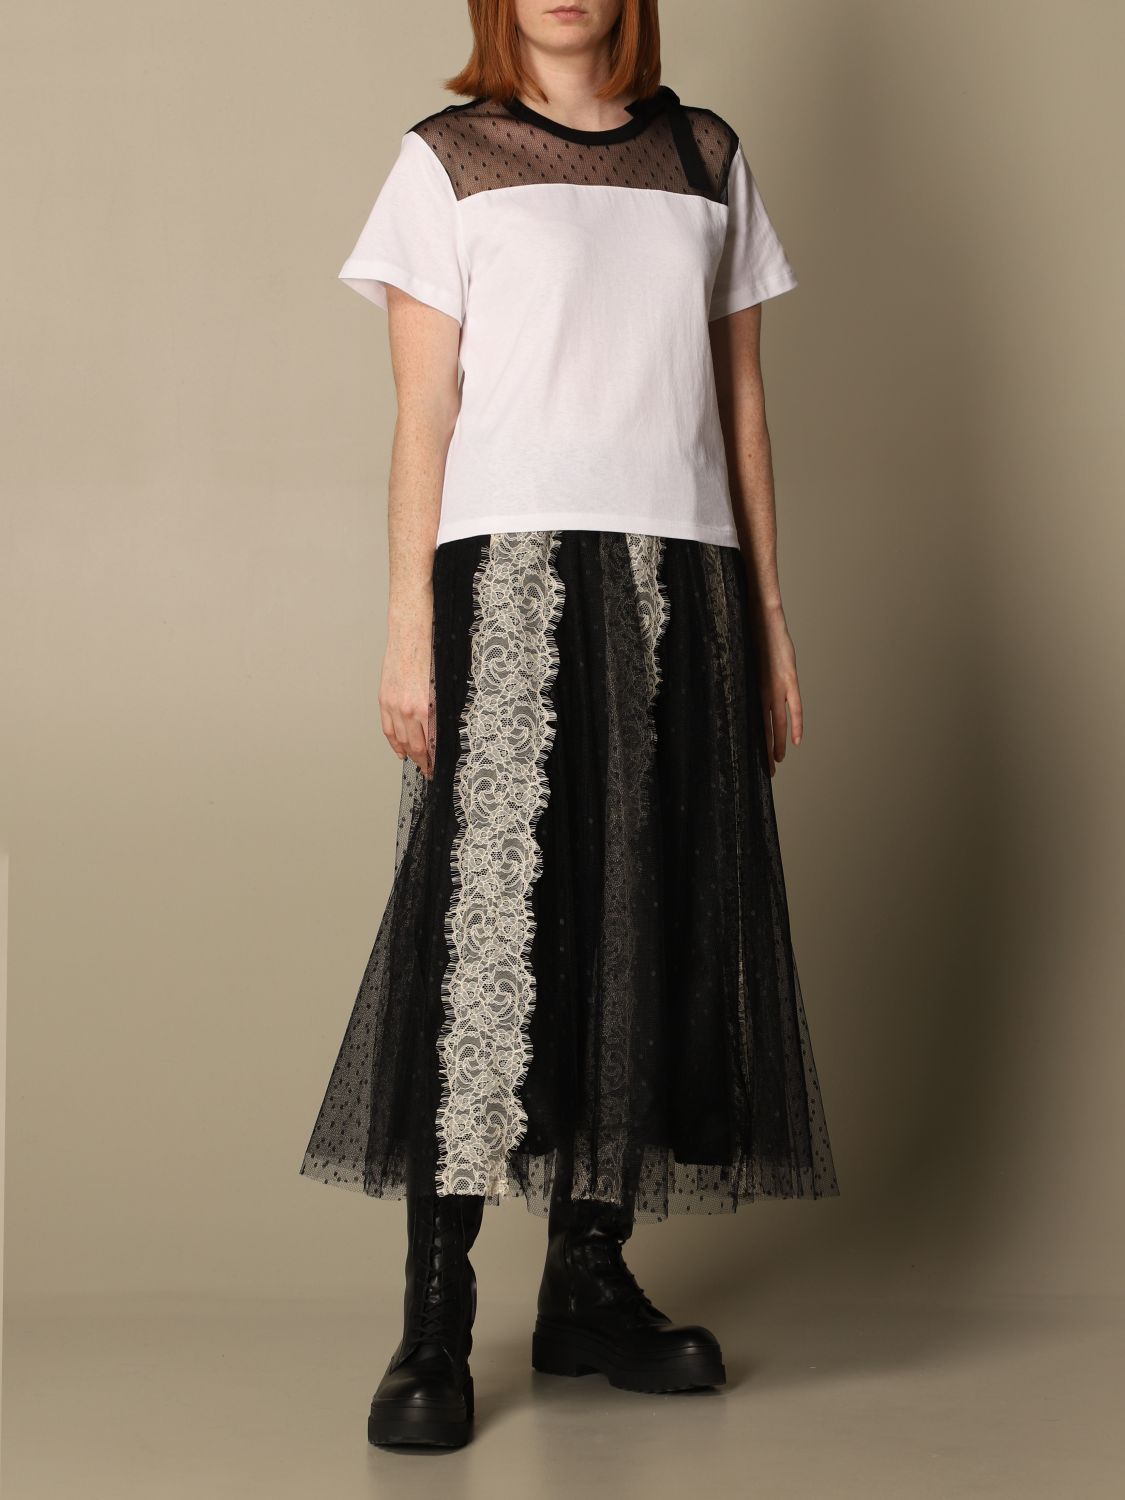 Red Valentino T-shirt in cotton and point d'esprit tulle